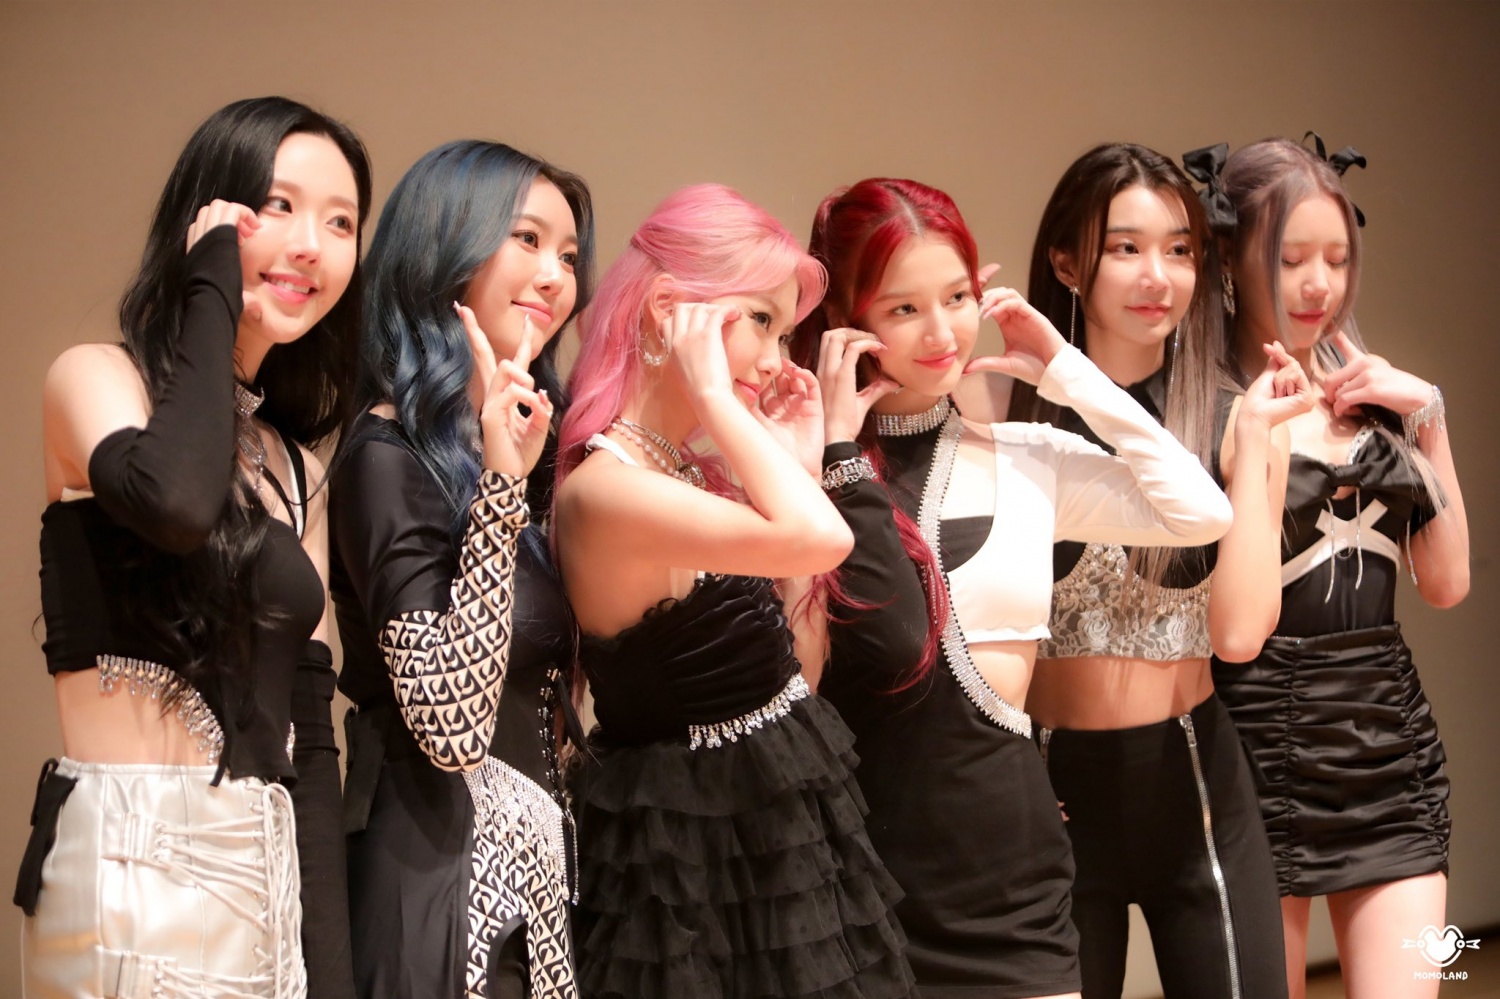 MOMOLAND, nominated for South American 'MTV MIAW'